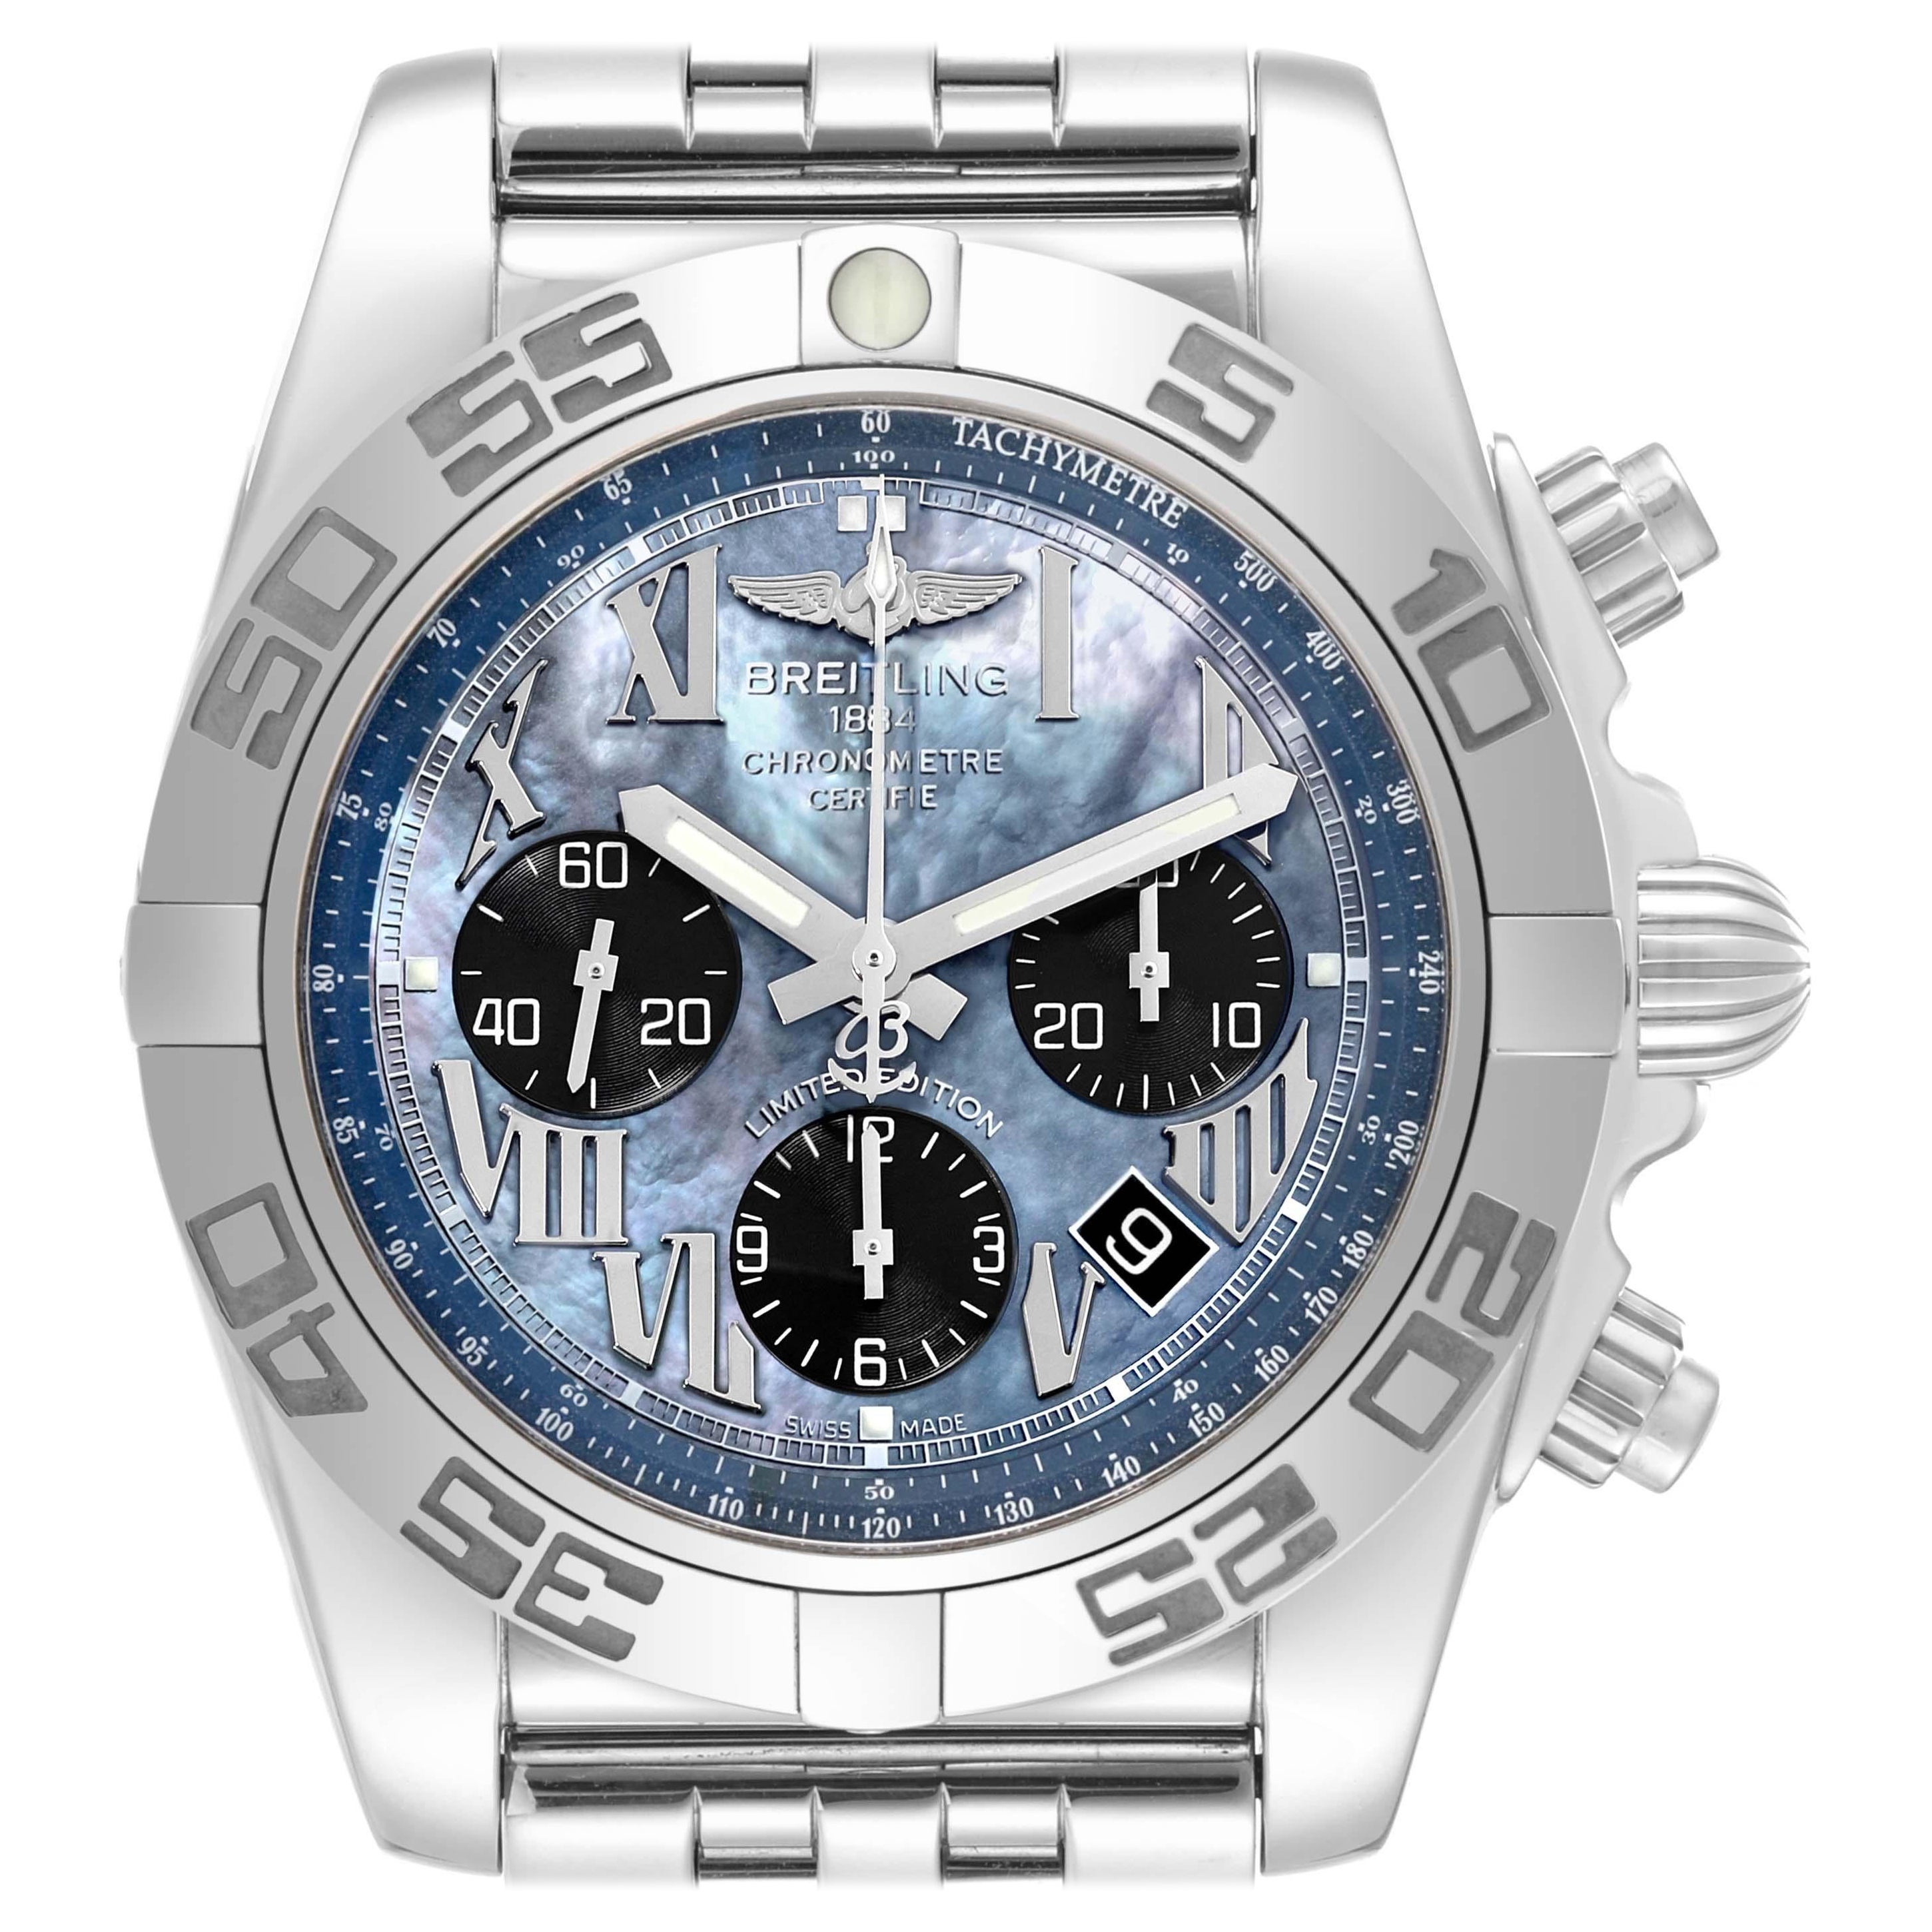 Breitling Chronomat 01 Mother of Pearl Steel Limited Edition Mens Watch For Sale